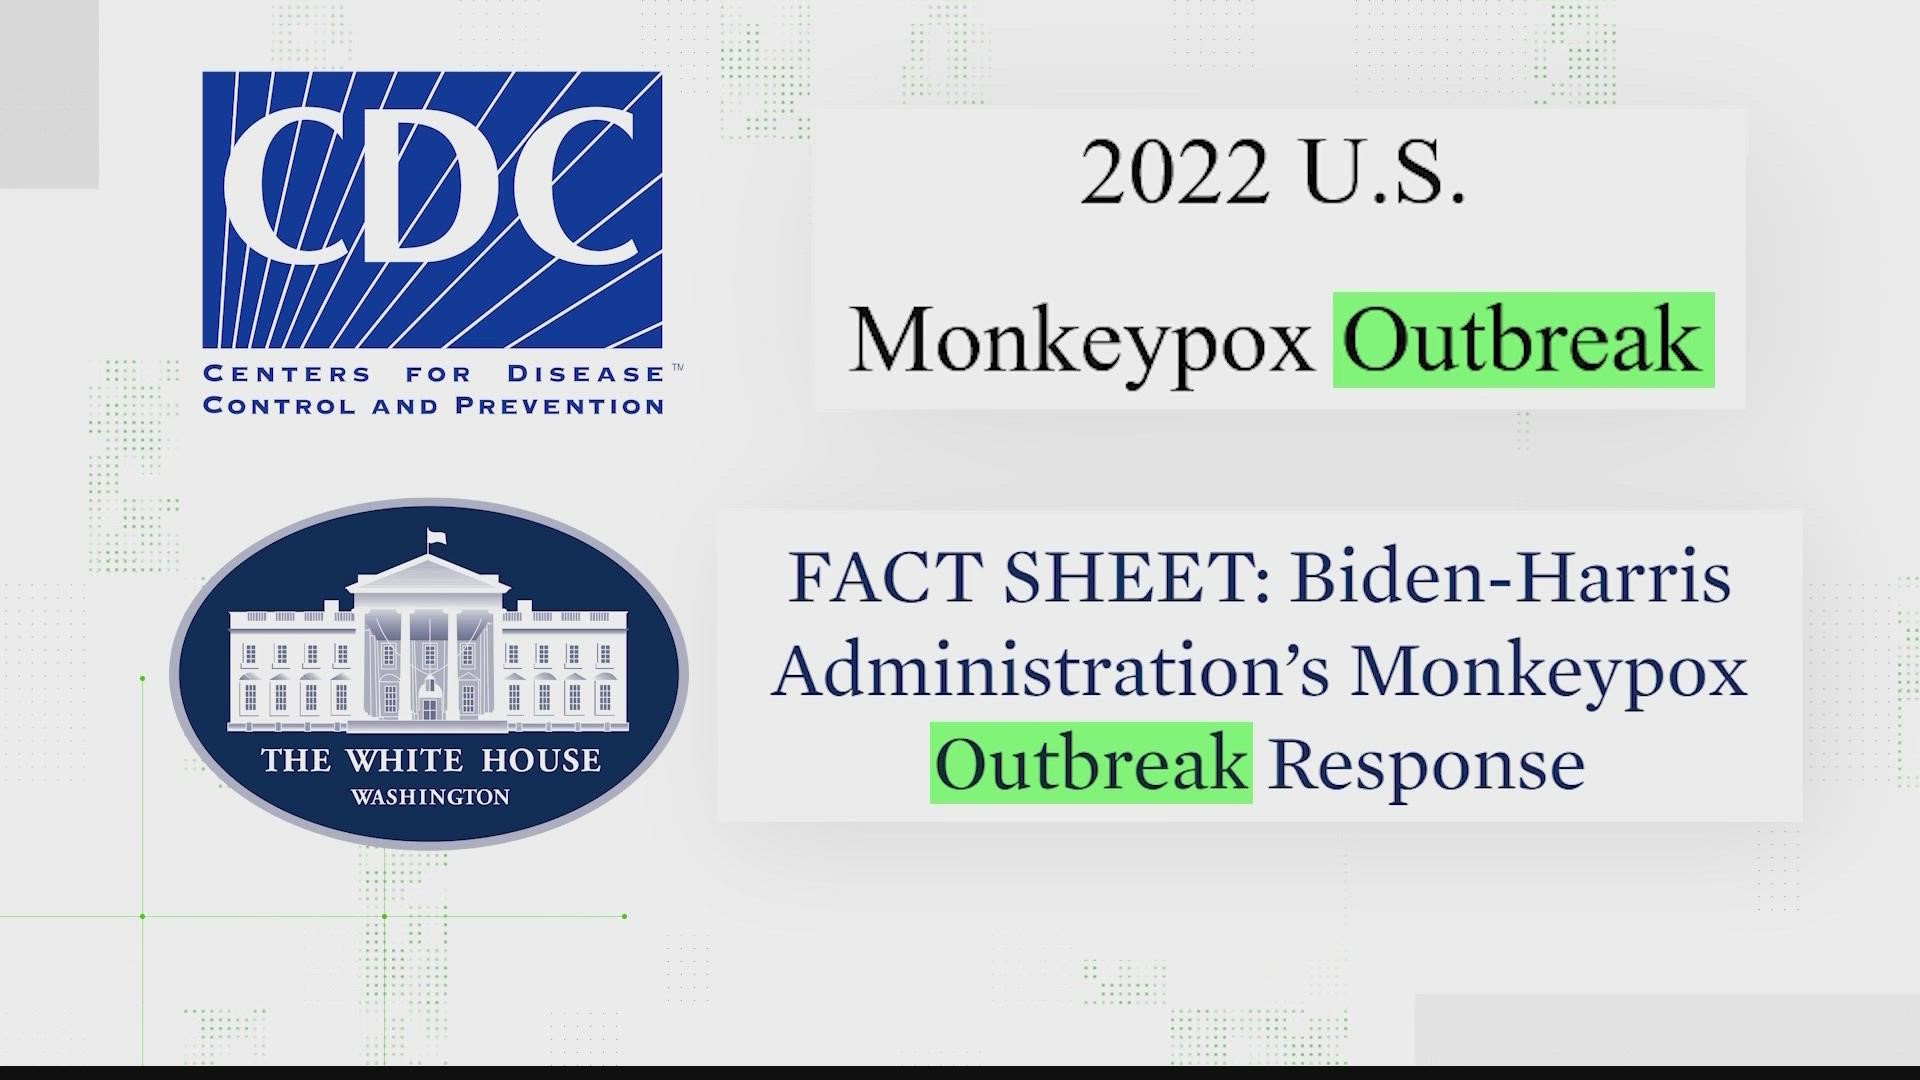 Public health officials are continuing to track the spread of Monkeypox nationwide. Brandon Lewis from our national verify team looks further into Monkeypox.